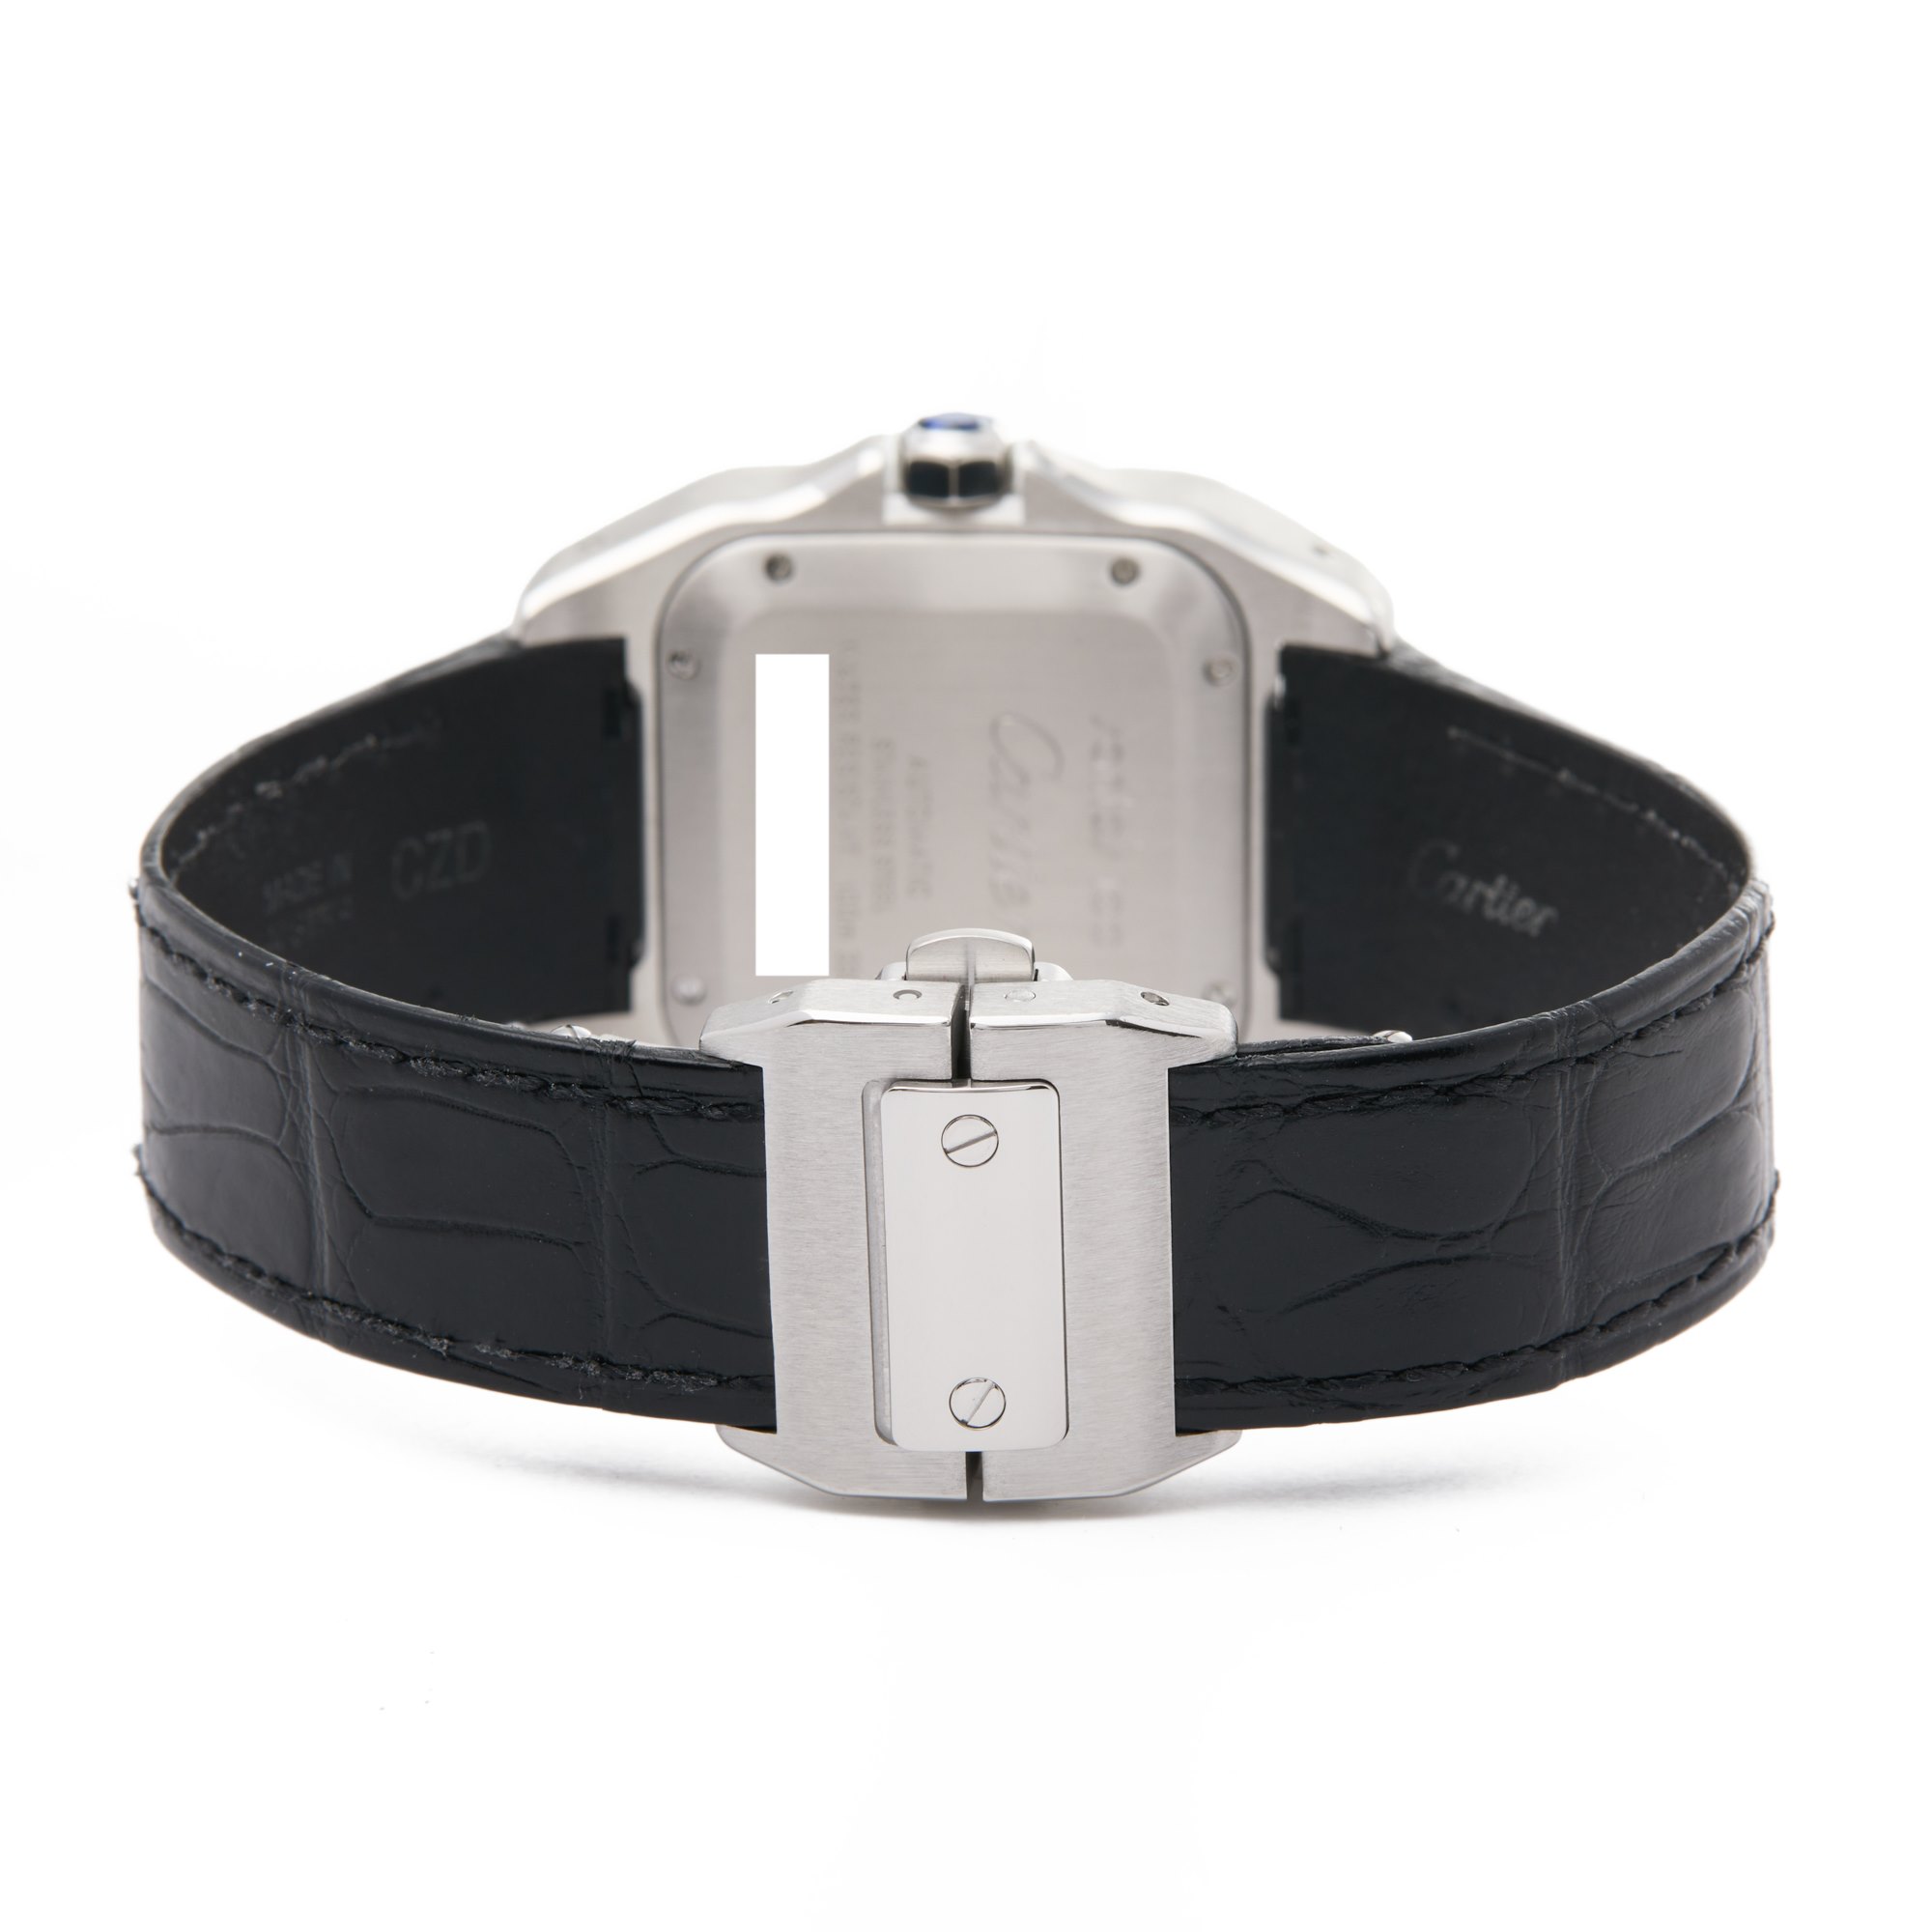 Cartier Santos Mid Size Stainless Steel 2878 or W20106X8